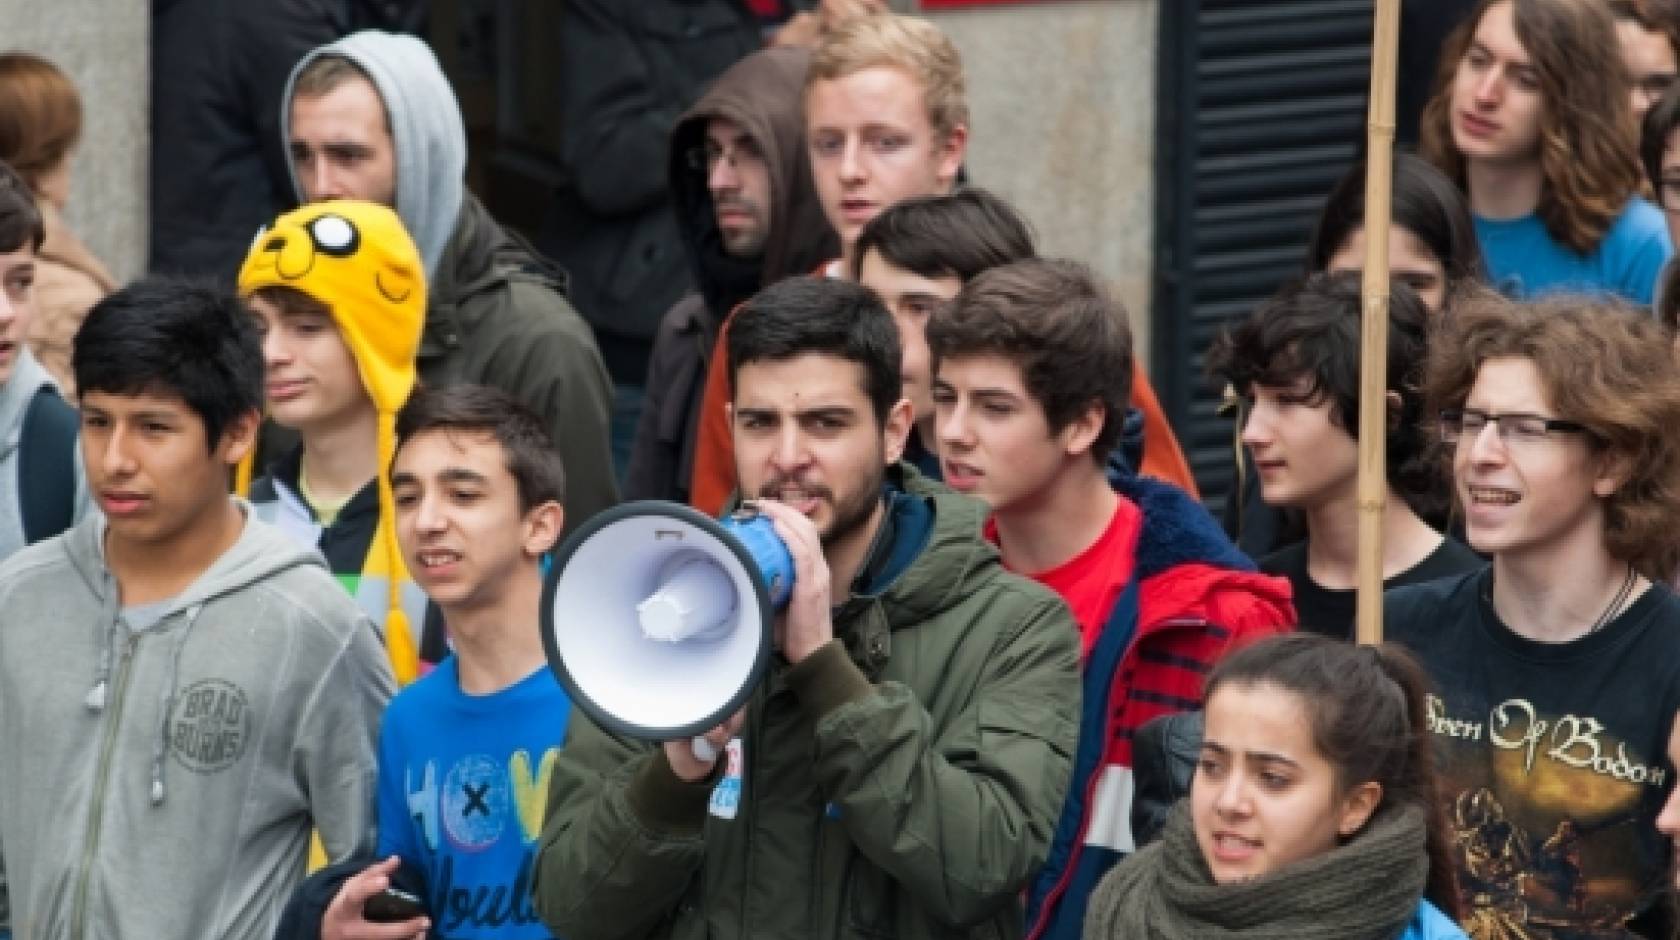 Group of young people at a protest